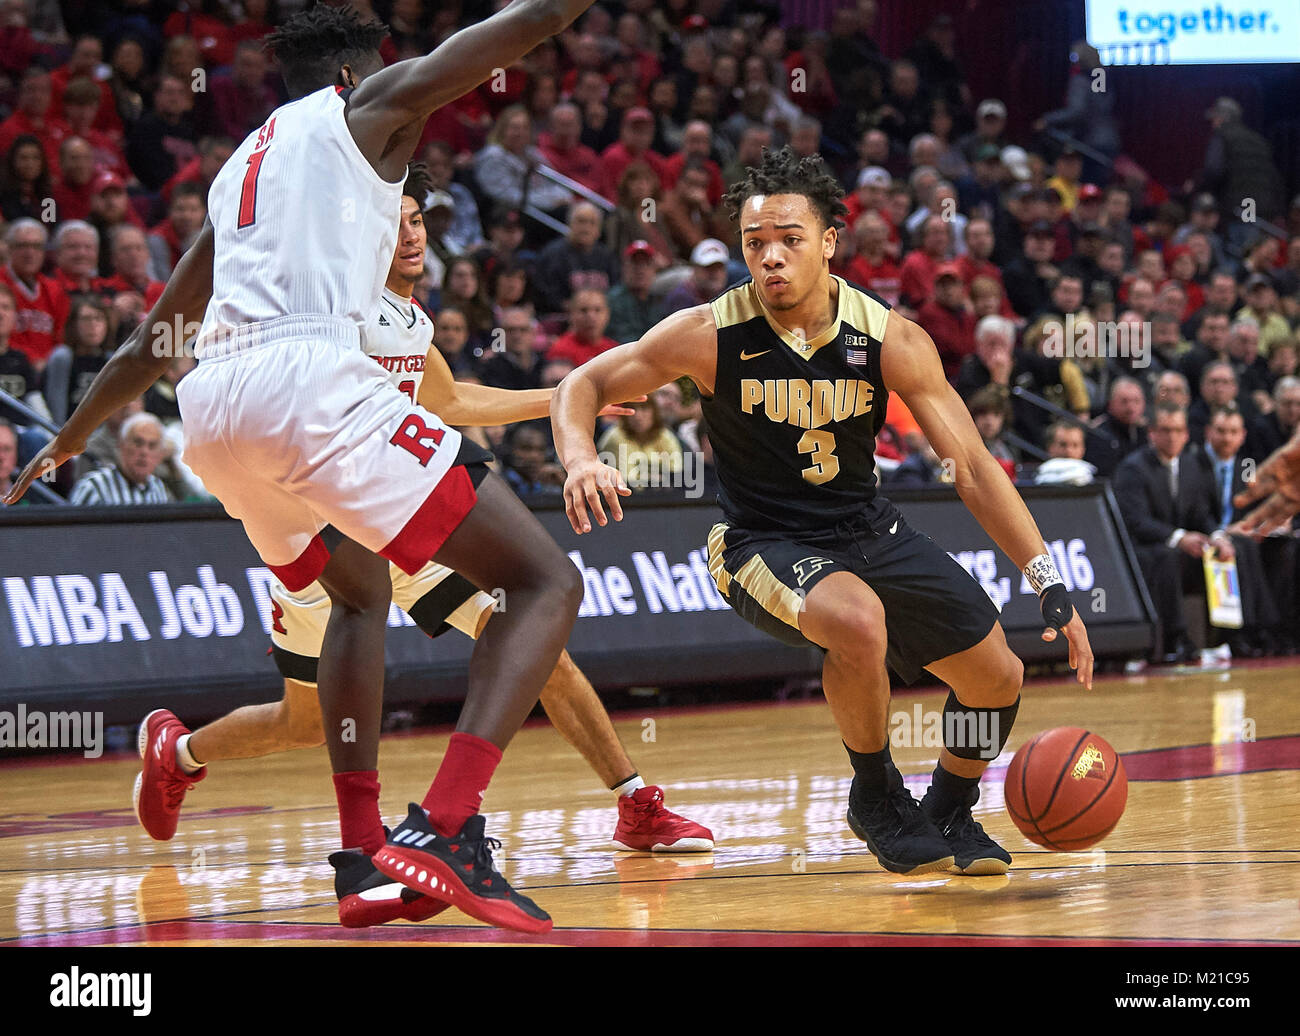 Piscataway, New Jersey, USA. 3rd Feb, 2018. Purdue Boilermakers guard Carsen Edwards (3) penetrates toward the basket as Rutgers Scarlet Knights forward Candido Sa (1) defends in the first half at Rutgers Athletic Center in Piscataway, New Jersey. #3Purdue defeated Rutgers 78-76. Duncan Williams/CSM/Alamy Live News Stock Photo